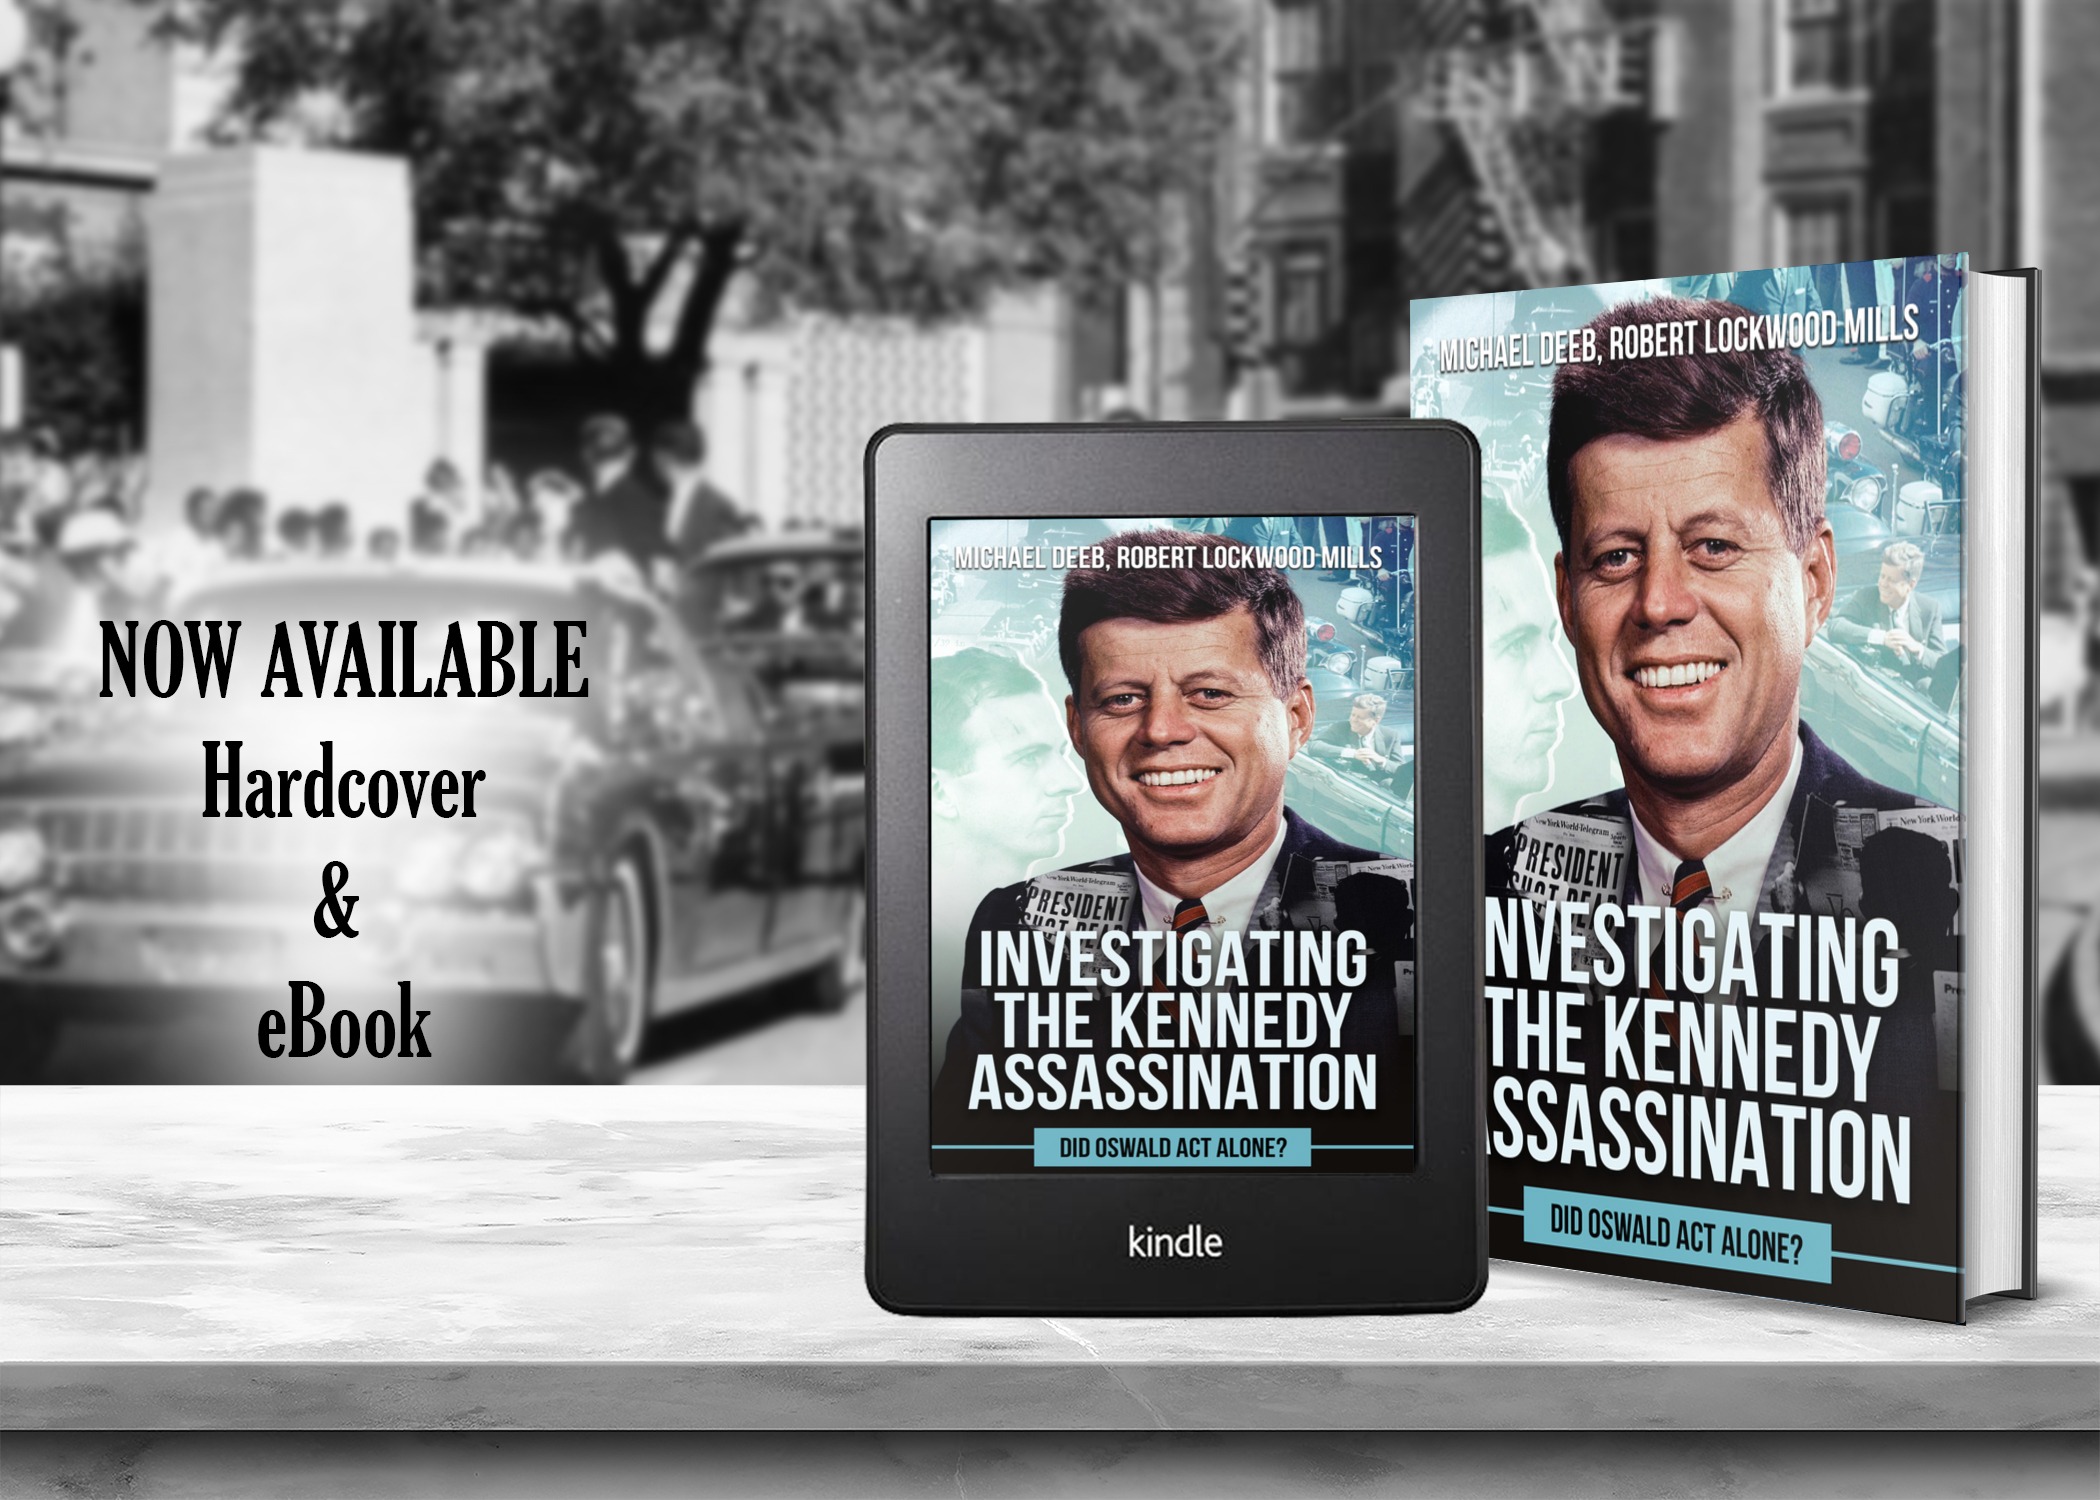 Investigating the Kennedy Assassination: Did Oswald Act Alone? by Michael Deeb and Robert Lockwood Mills,  now available from Histria Books